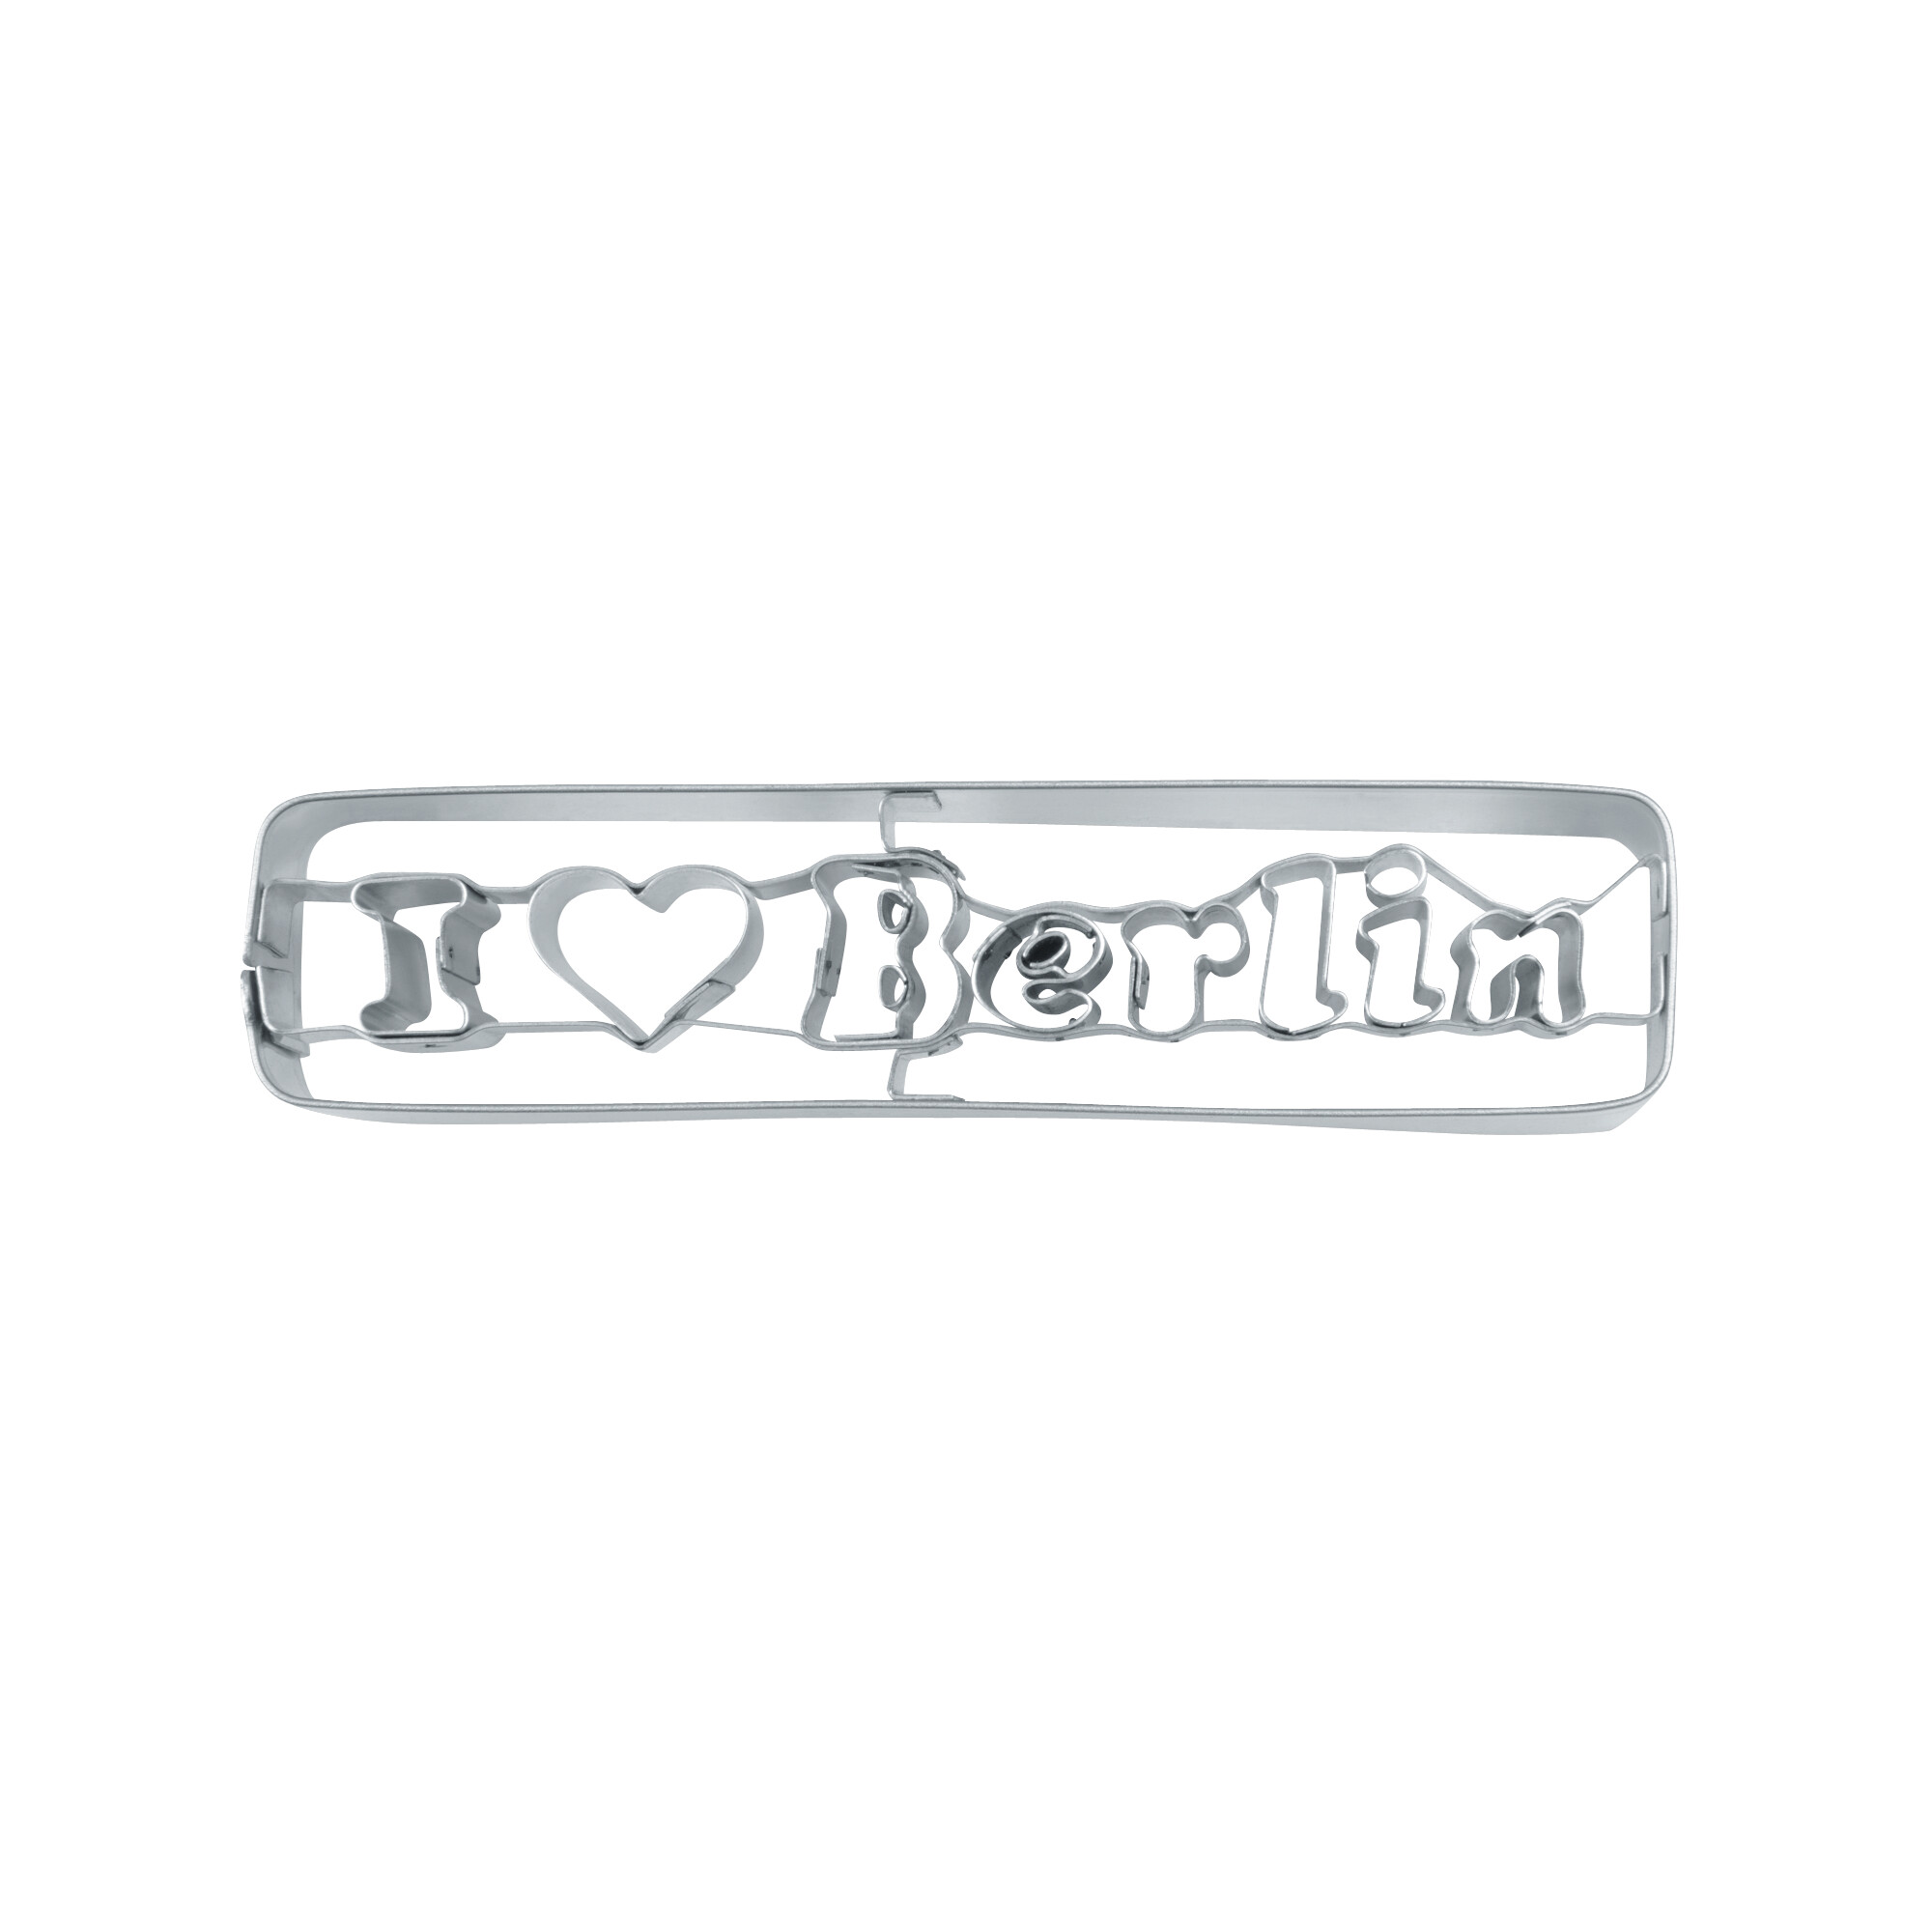 Cookie cutter with stamp – I Love Berlin